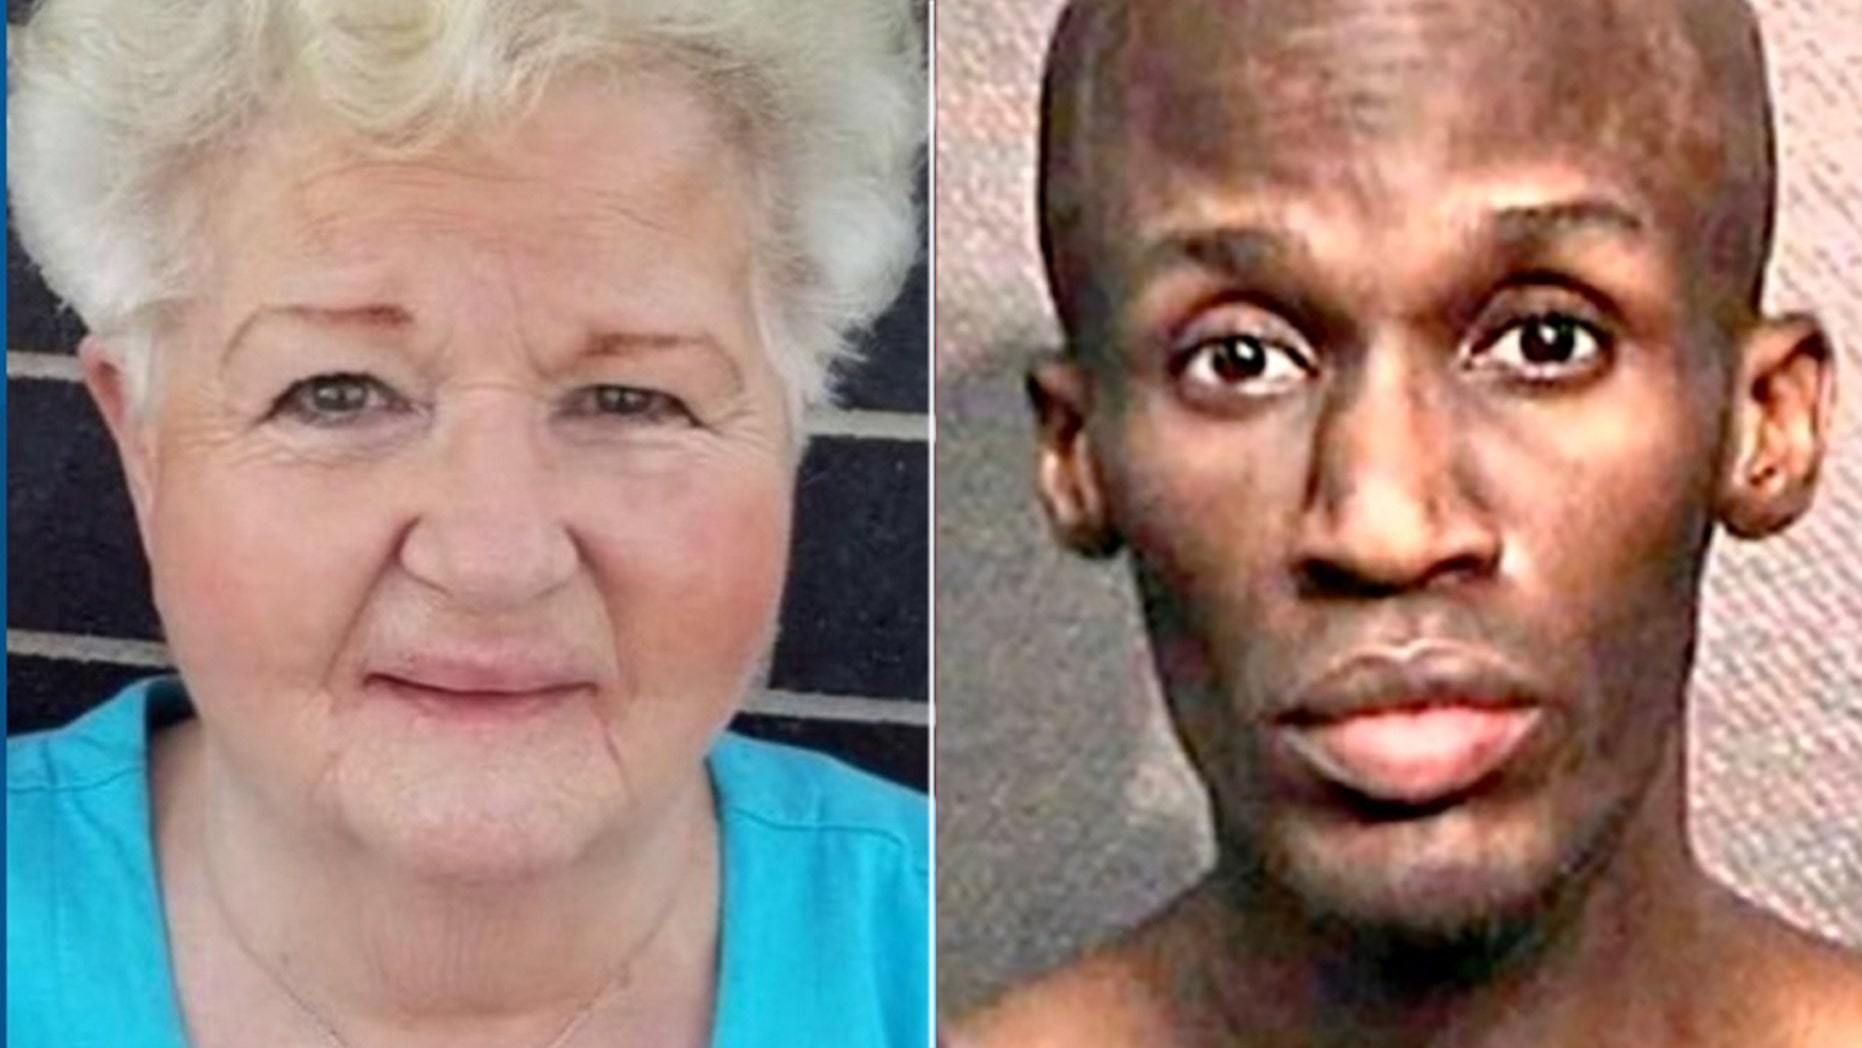 Son of Texas woman stabbed to death by man arrested 67 times and out on bail urges change: 'No accountability'